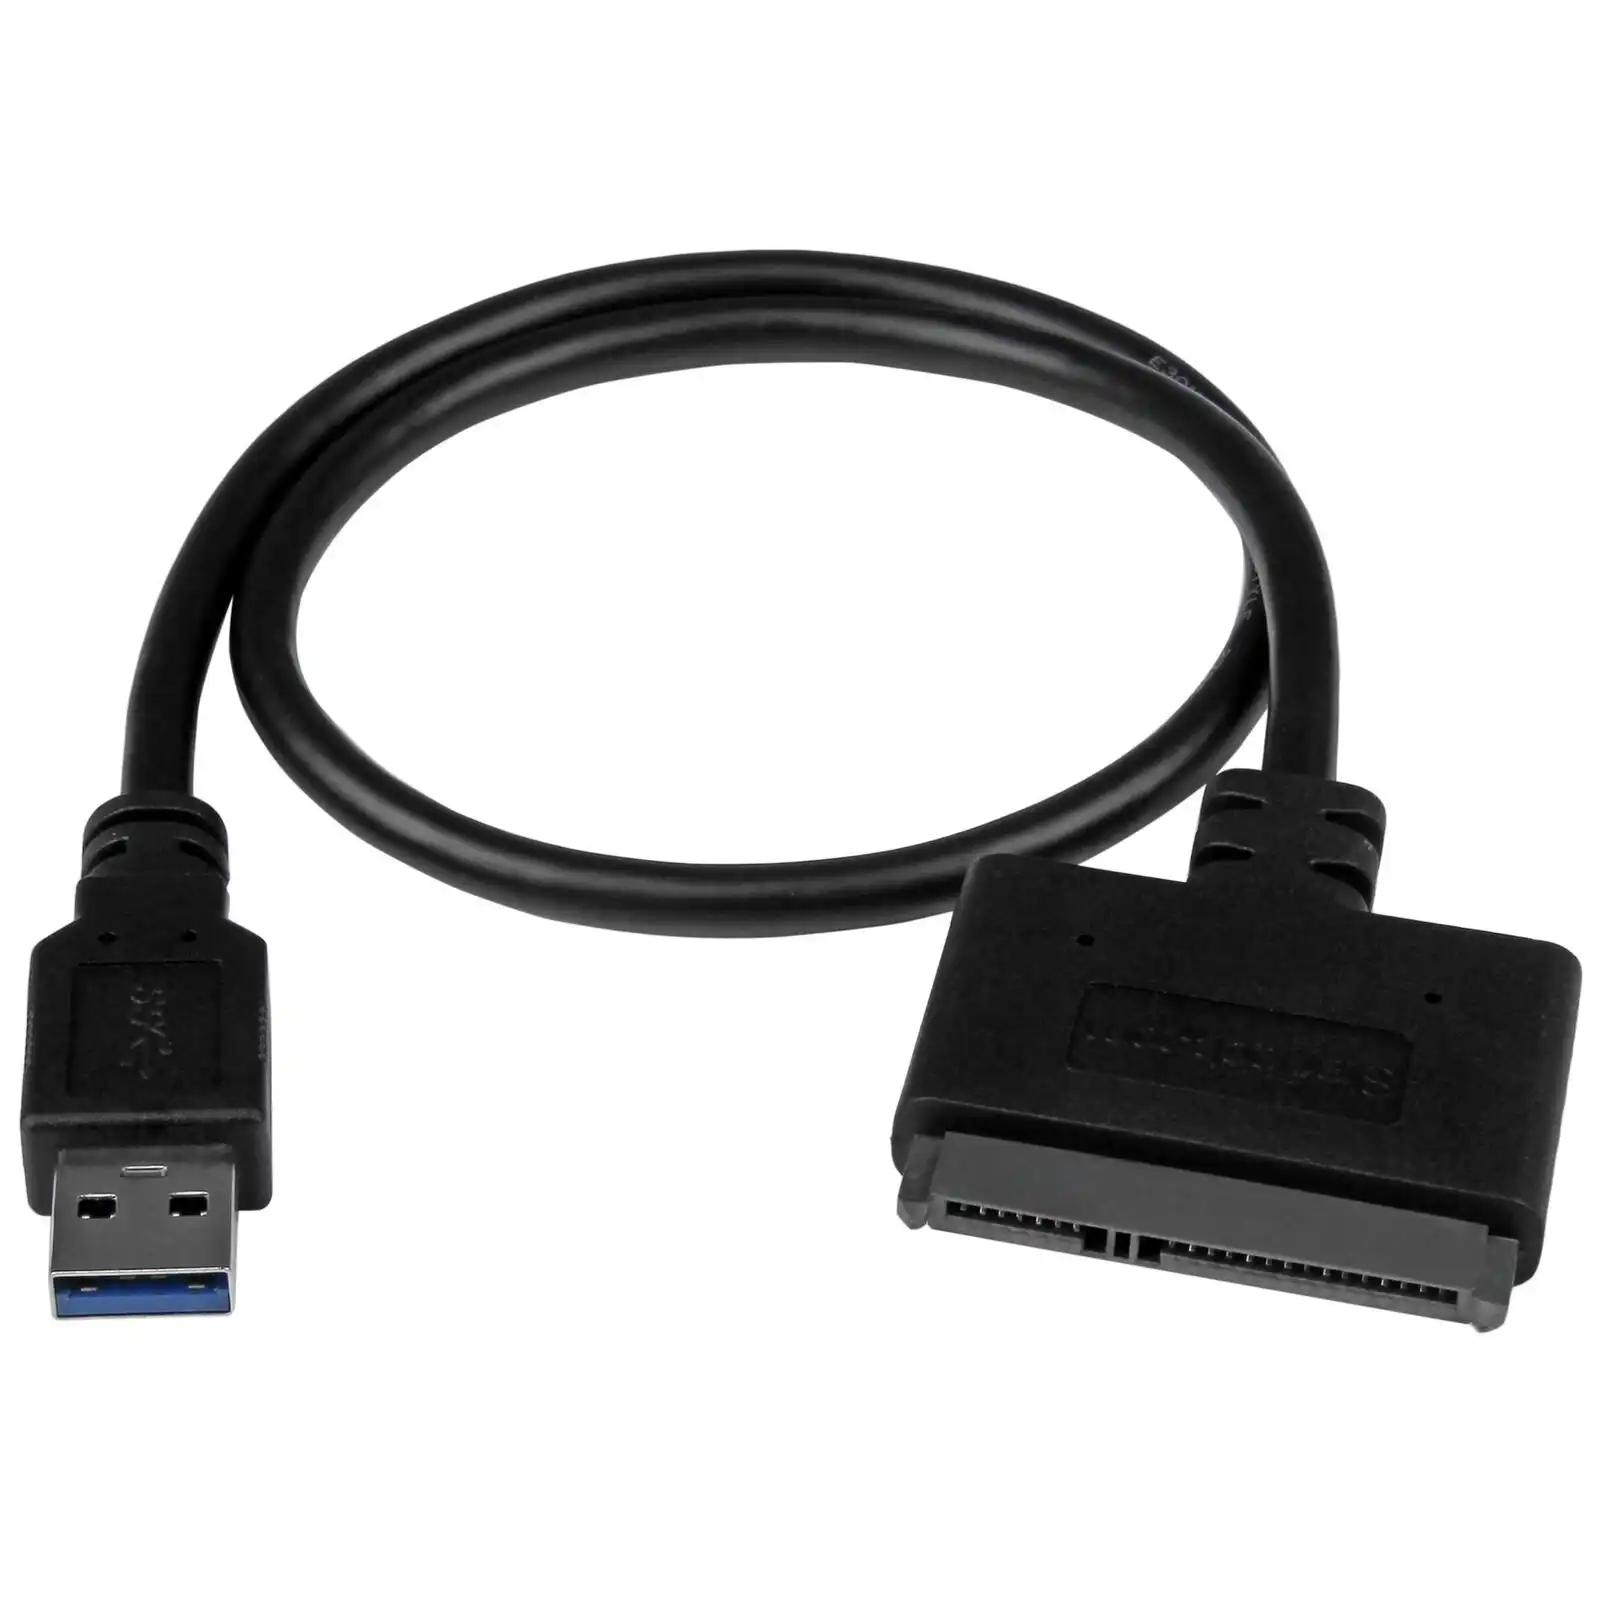 Star Tech 10Gbps USB-A 3.1 to SATA Adapter Transfer Cable for 2.5" SSD/HDD Drive